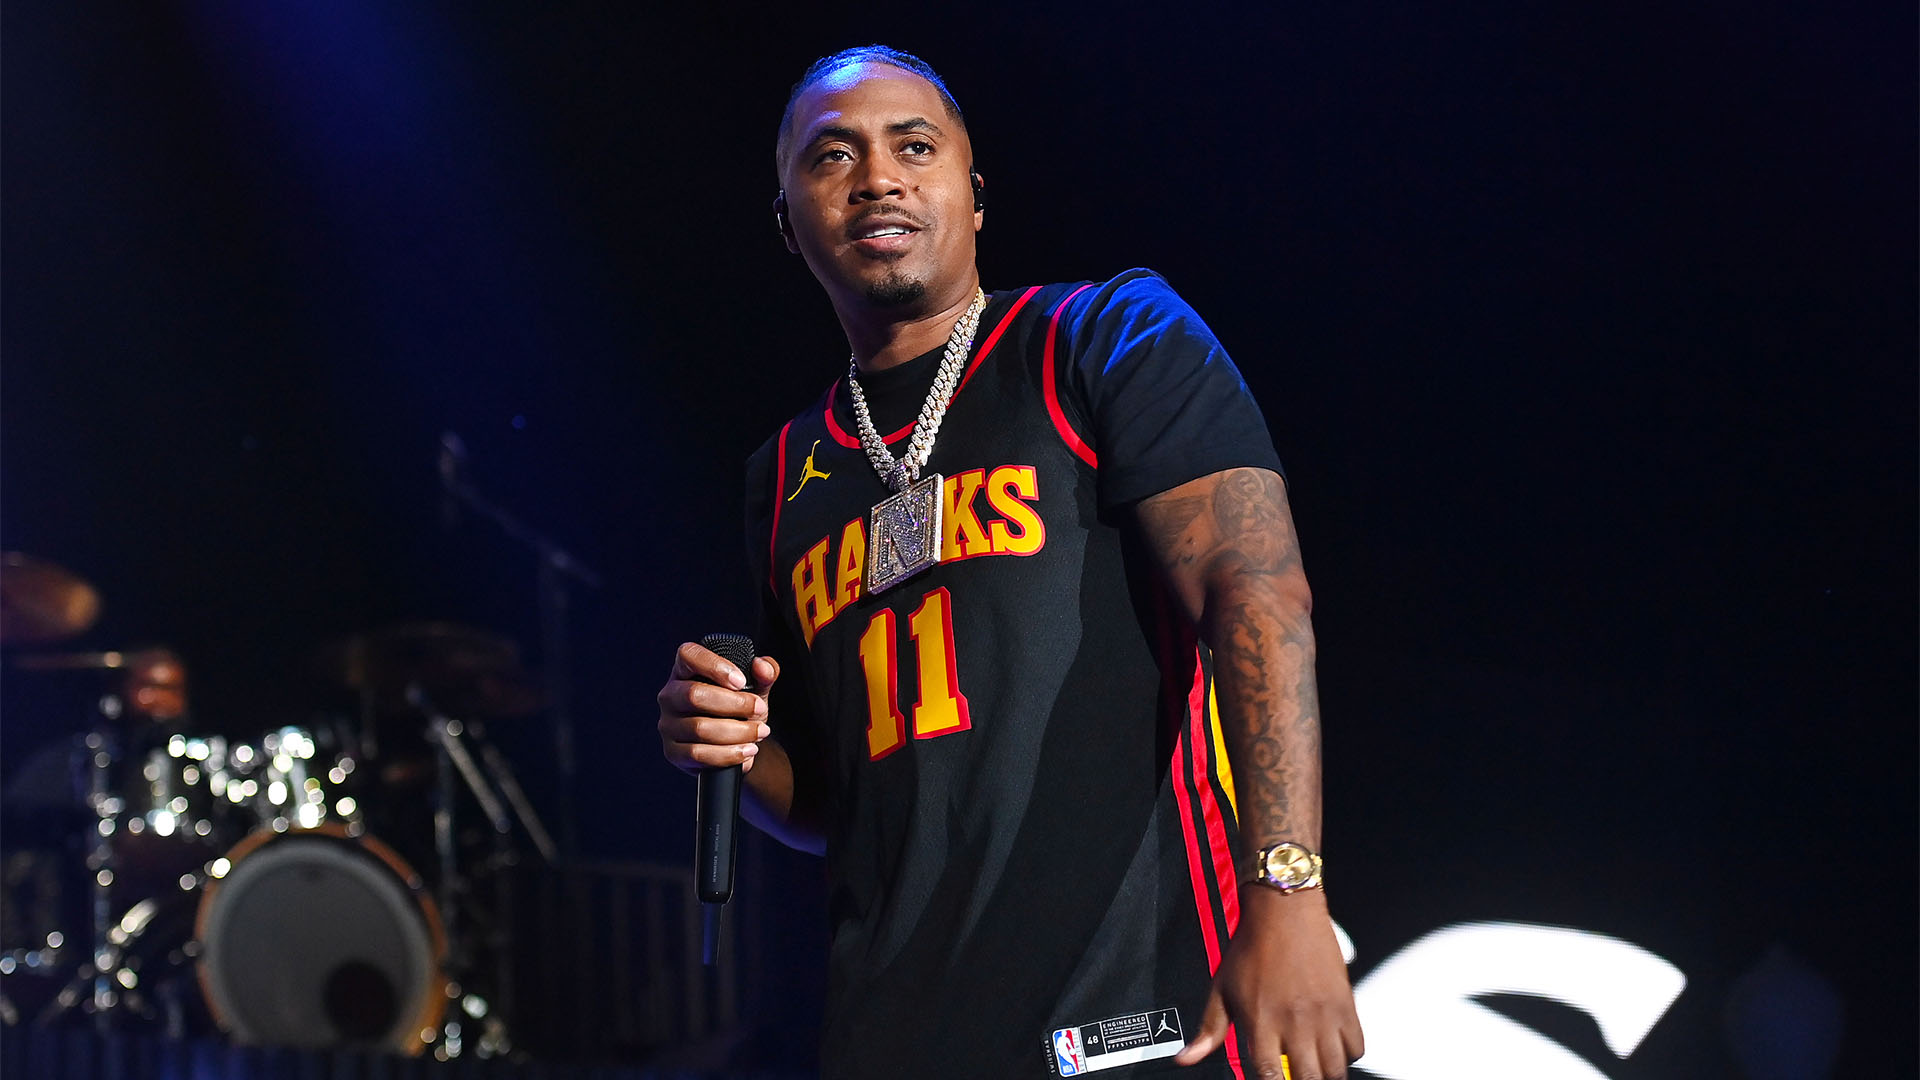 Nas, Resorts World NYC Unveil A $5B Proposal He Says Could Give 'New Opportunities To The Hard-Working Families' In His Hometown Of Queens